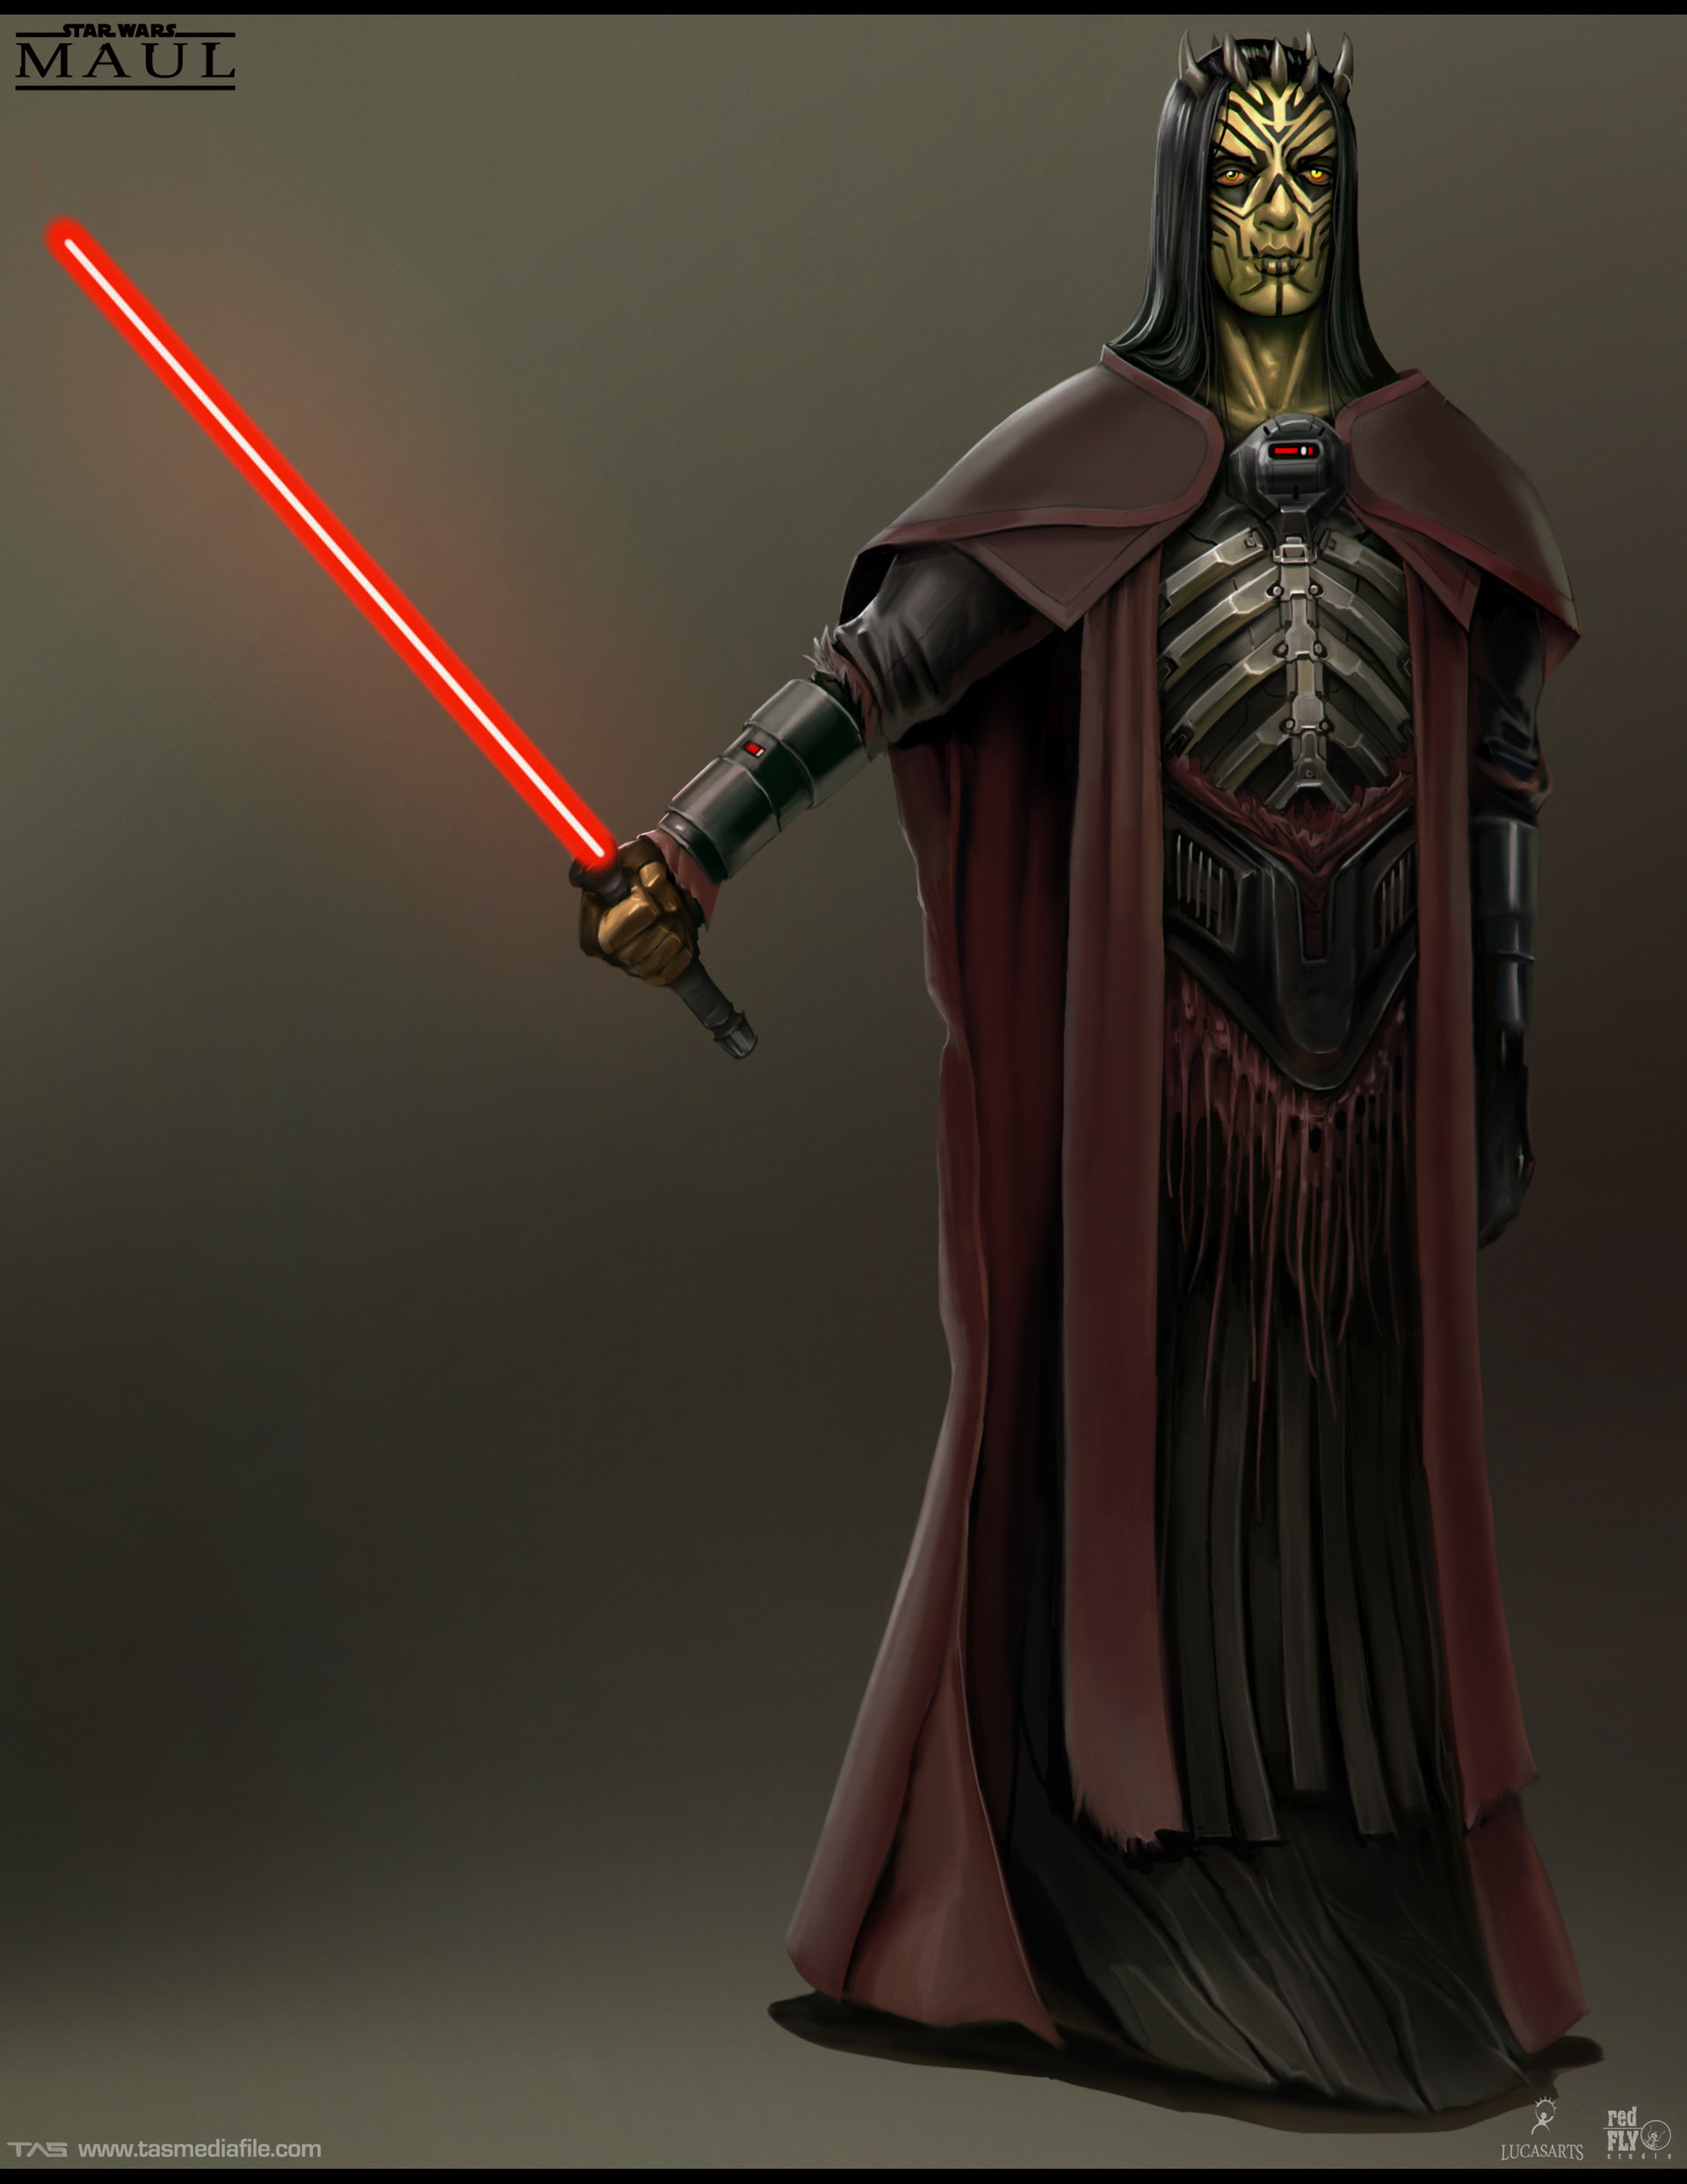 New Star Wars: Maul &#8211; Canceled Game About Darth Mall